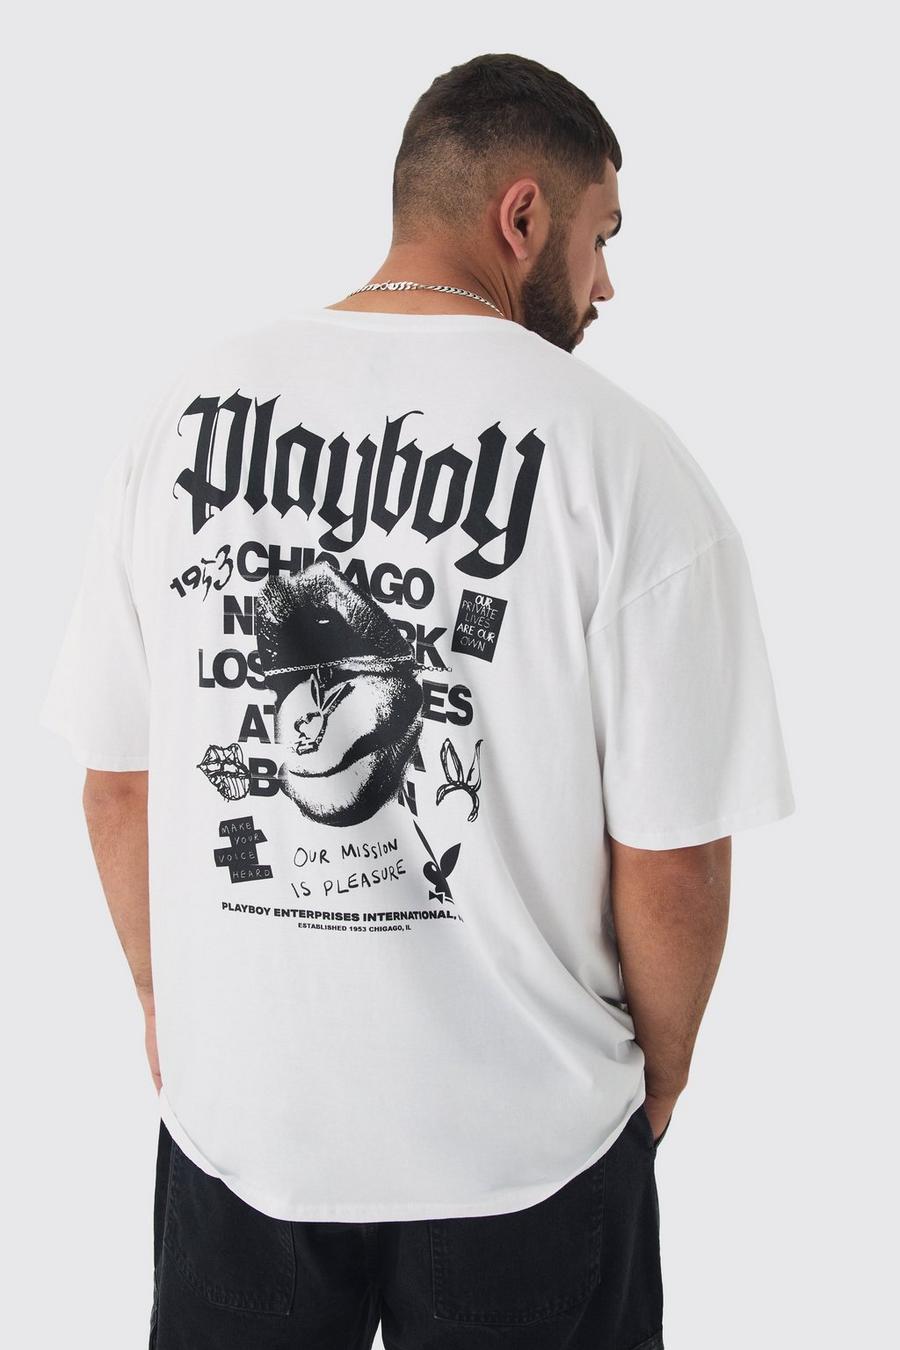 Plus Playboy Back Printed Licensed T-shirt In White